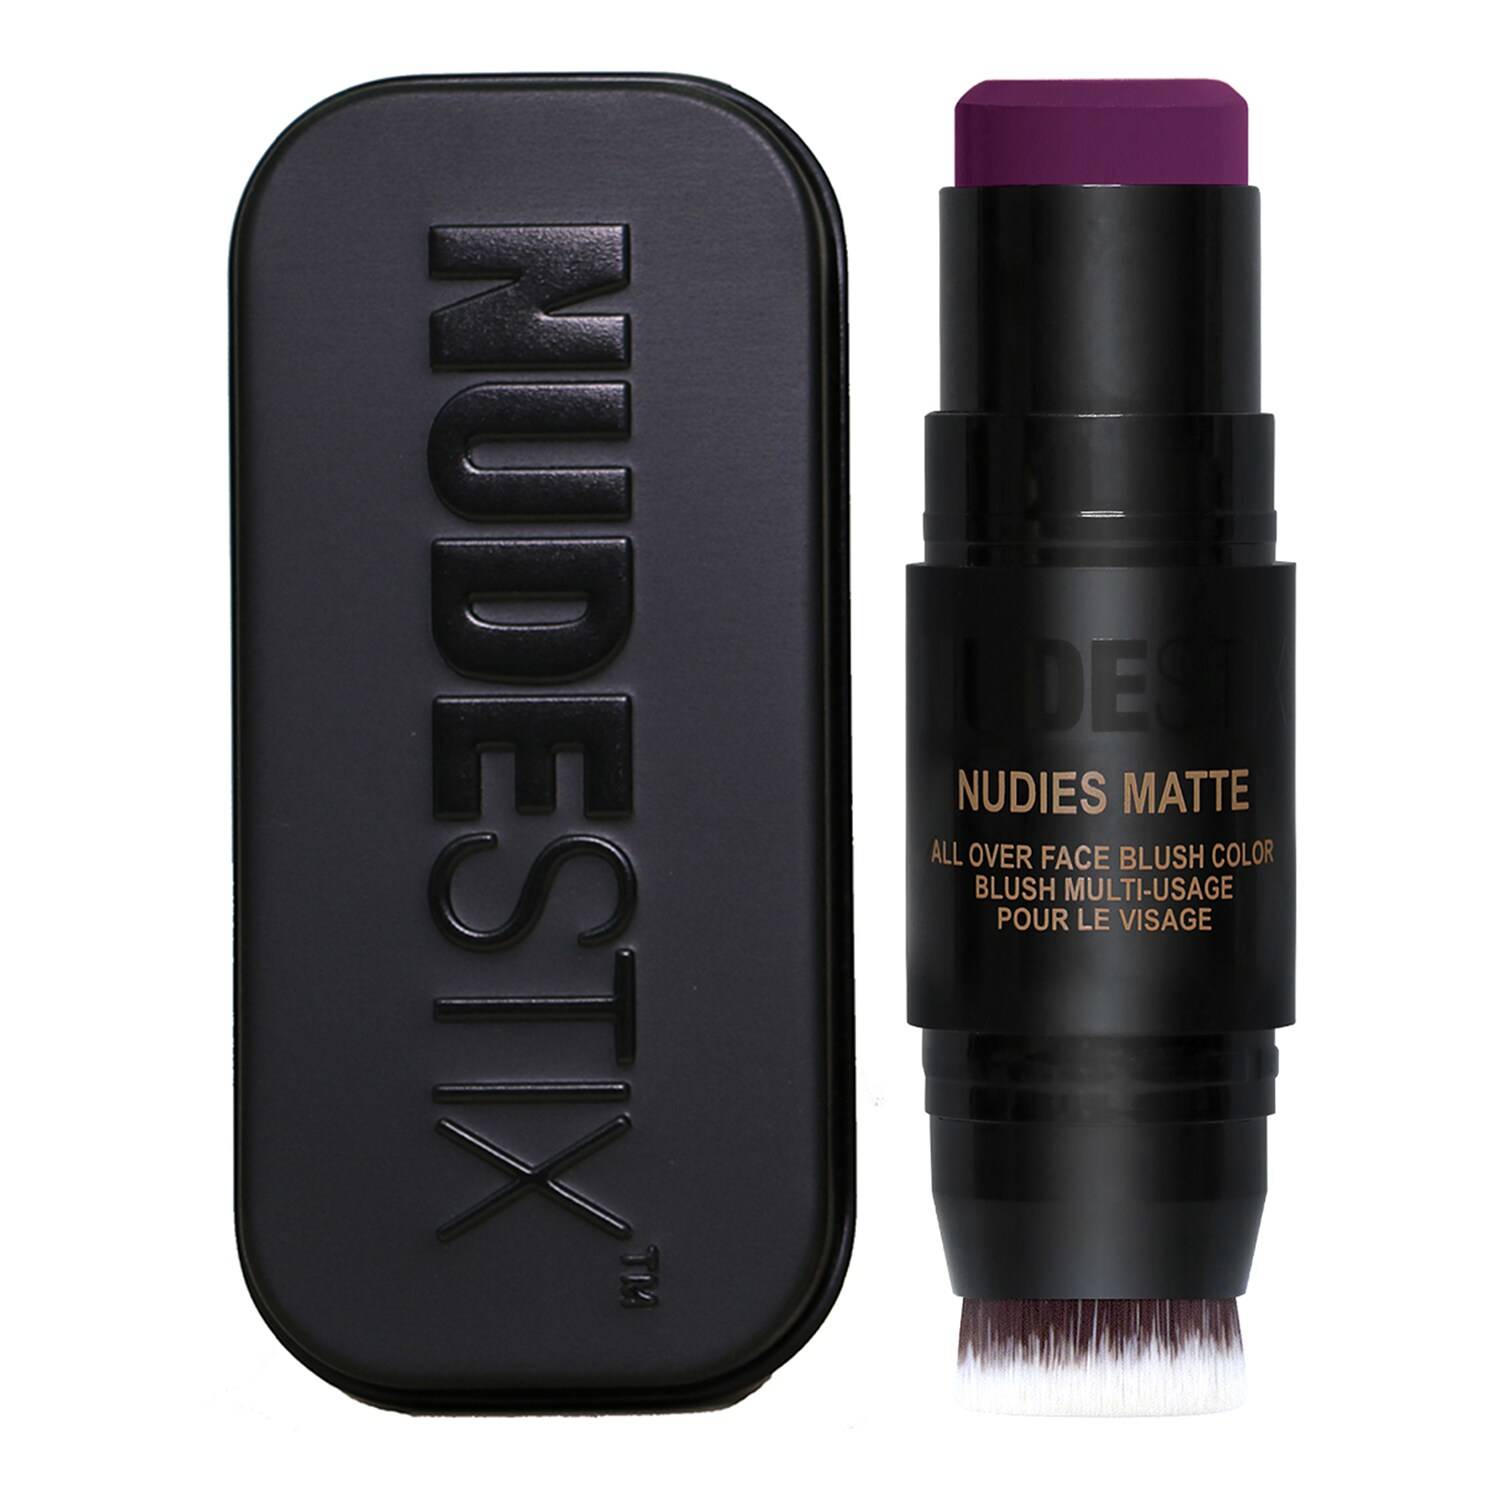 Nudestix Nudies Matte All Over Face Blush Color 7G Moodie Blu